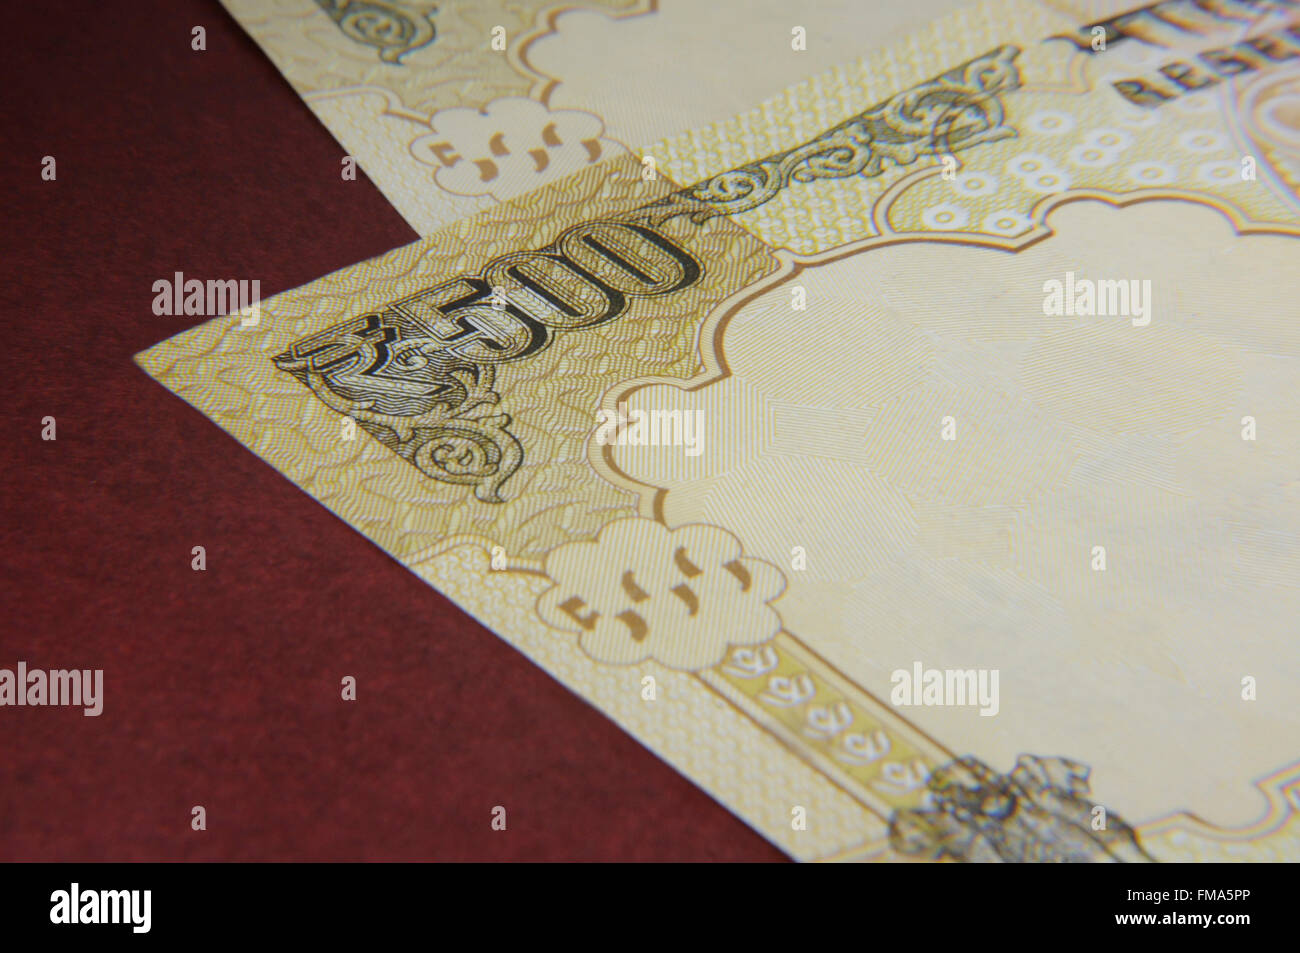 indian currency rupee notes (Indian Currency) Stock Photo